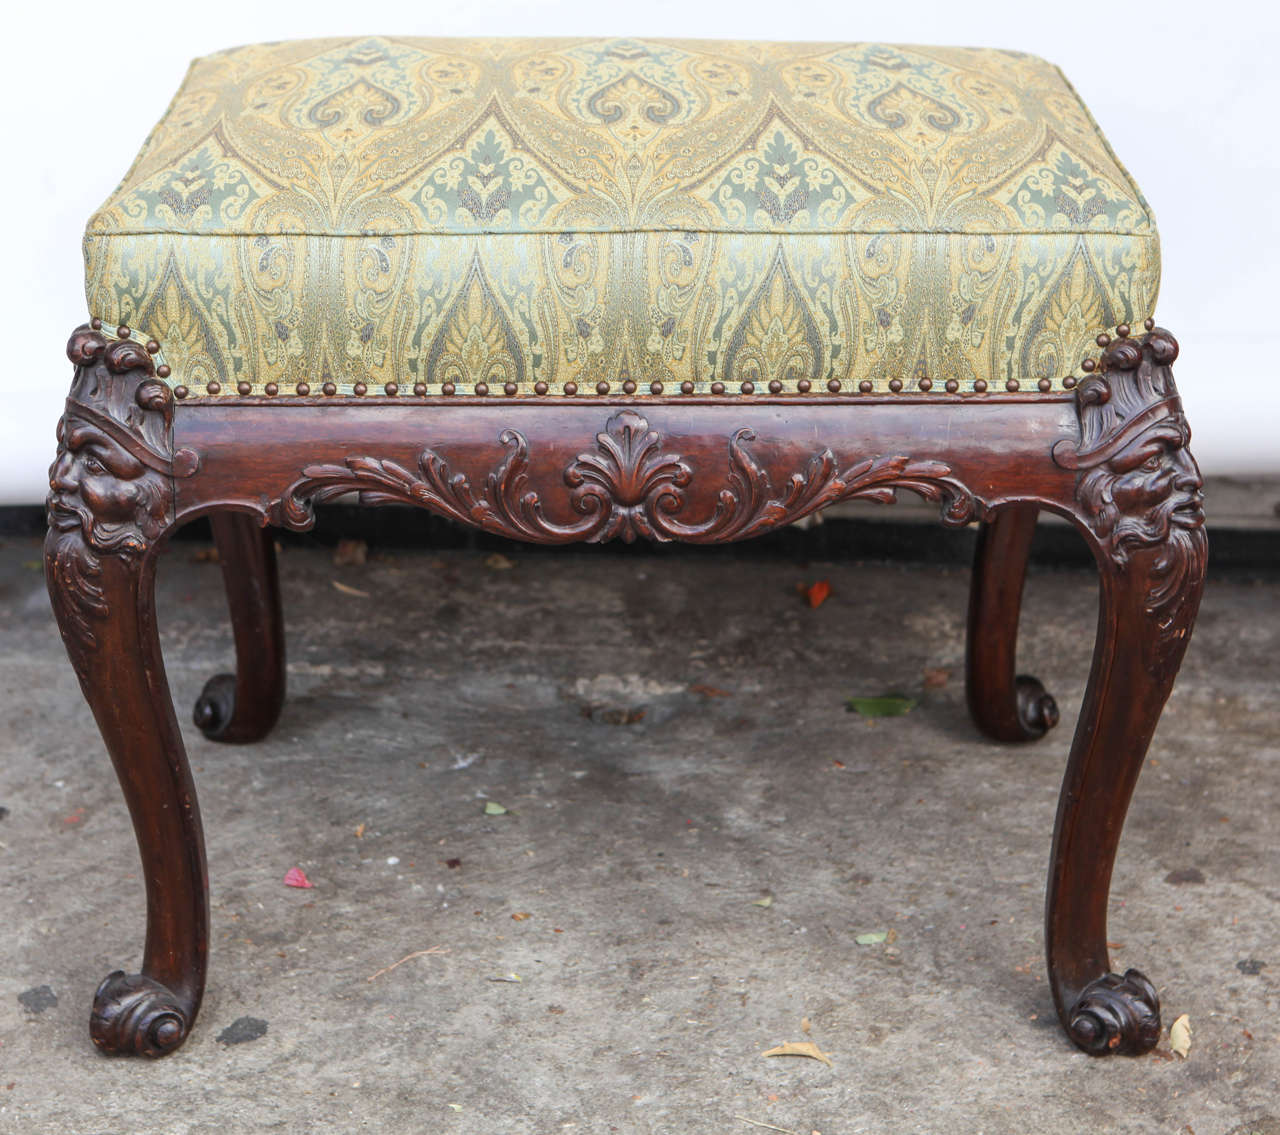 19th c. English carved Mahogany Bench or Stool with Green Silk Paisley Fabric.  The fine carving includes a face motif and scroll feet with nail head detail.